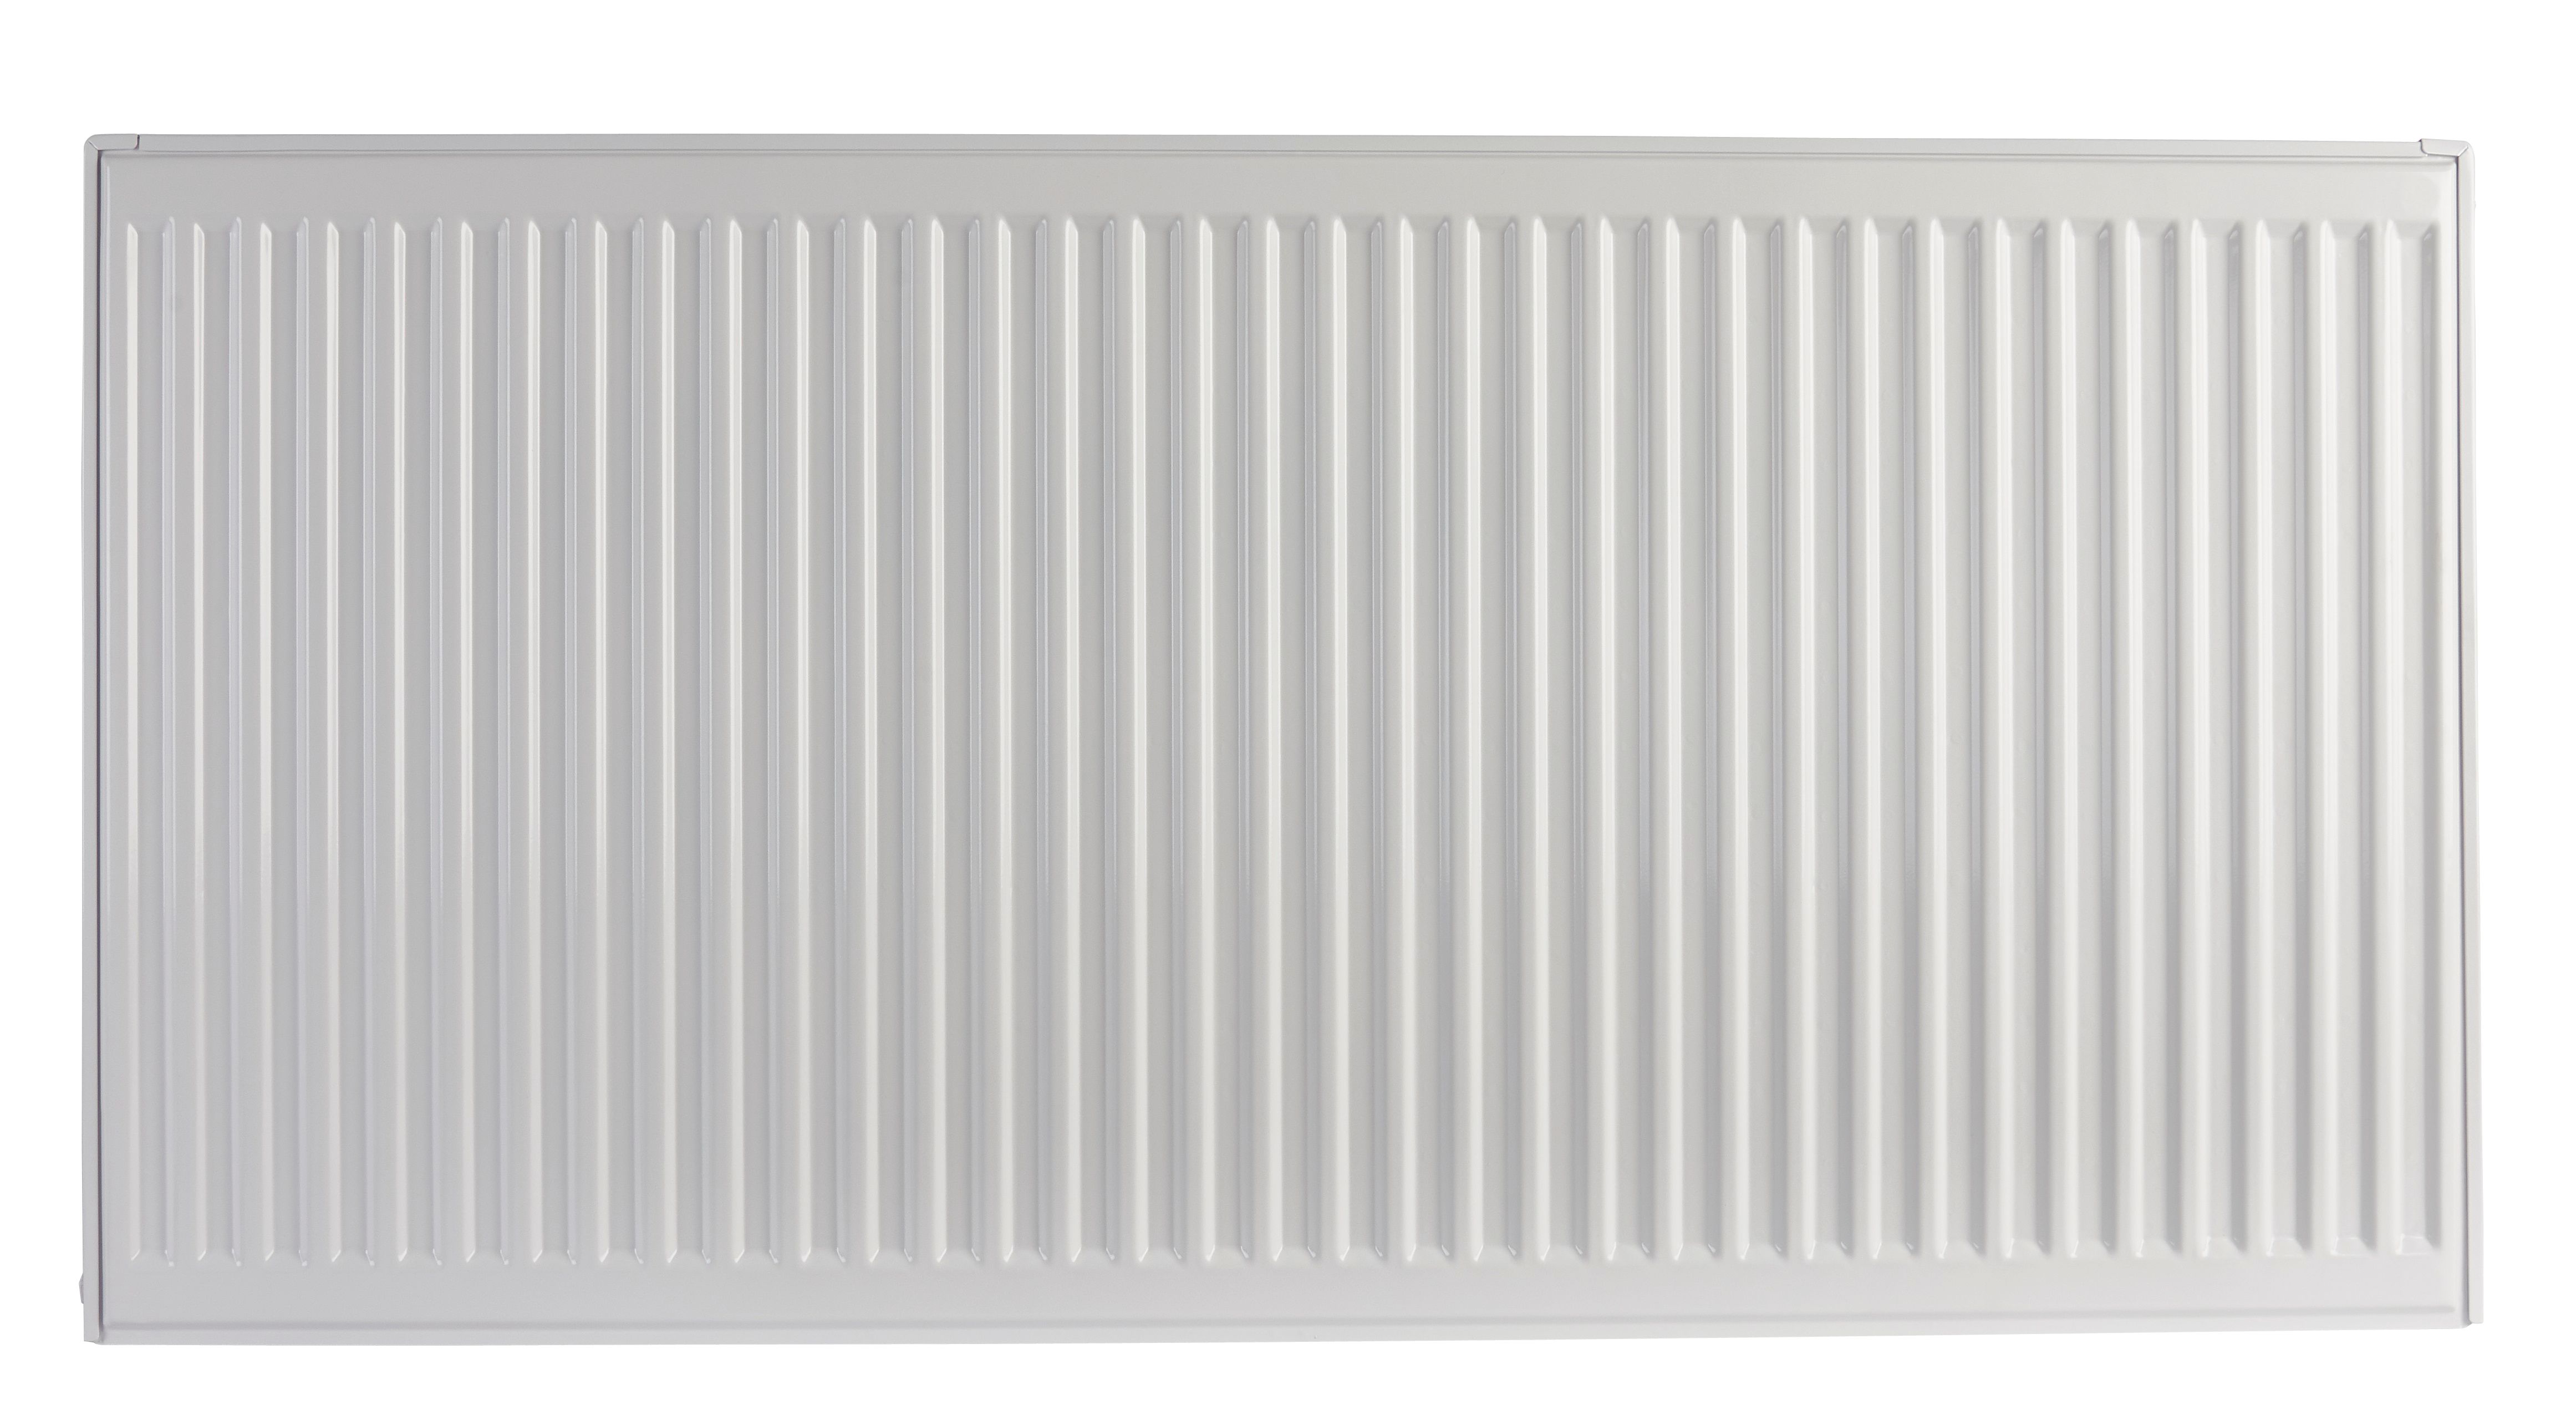 Image of Homeline by Stelrad 500 x 700mm Type 11 Single Panel Single Convector Radiator